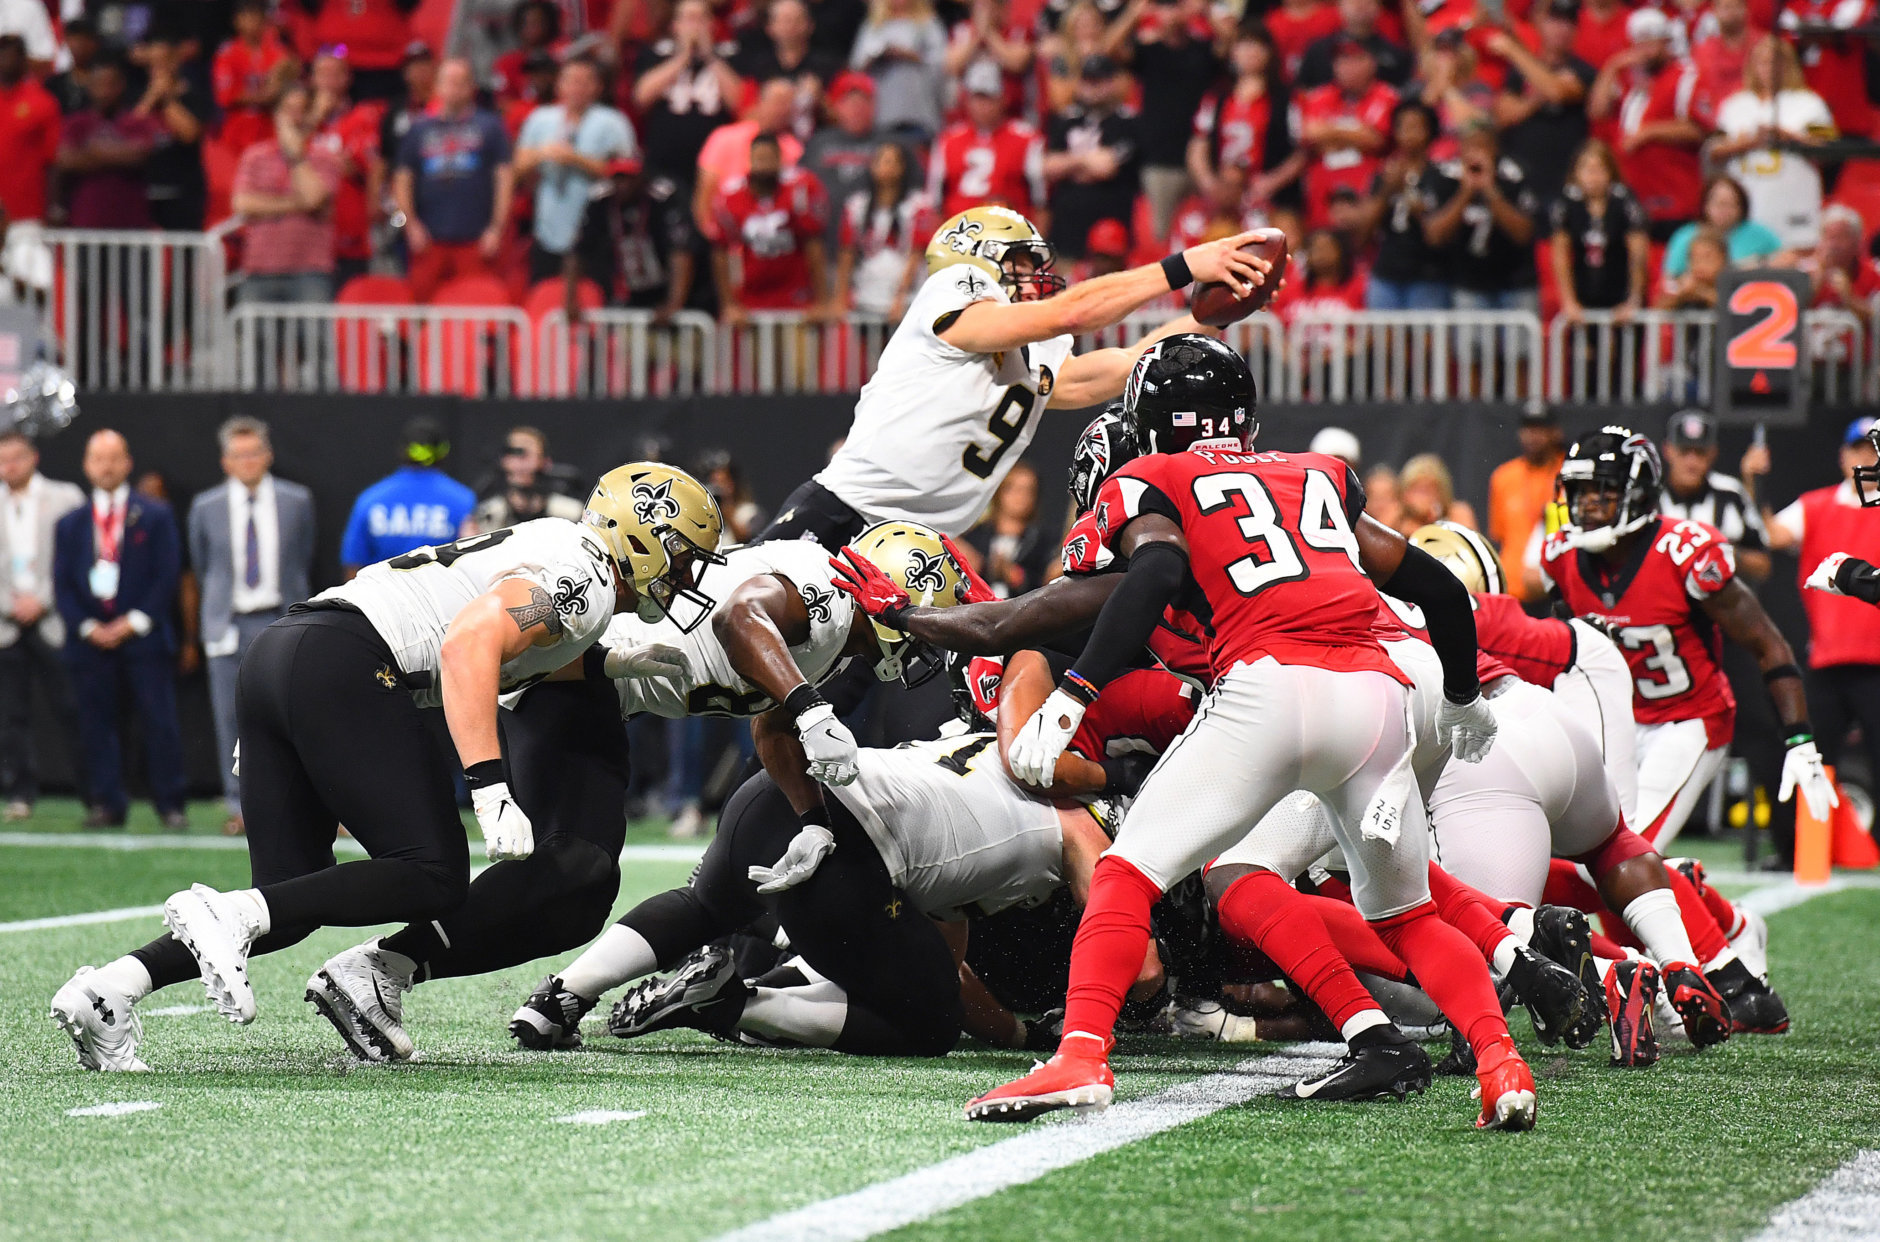 ATLANTA, GA - SEPTEMBER 23: Drew Brees #9 of the New Orleans Saints scores the game-winning touchdown in overtime against the Atlanta Falcons at Mercedes-Benz Stadium on September 23, 2018 in Atlanta, Georgia. (Photo by Scott Cunningham/Getty Images)